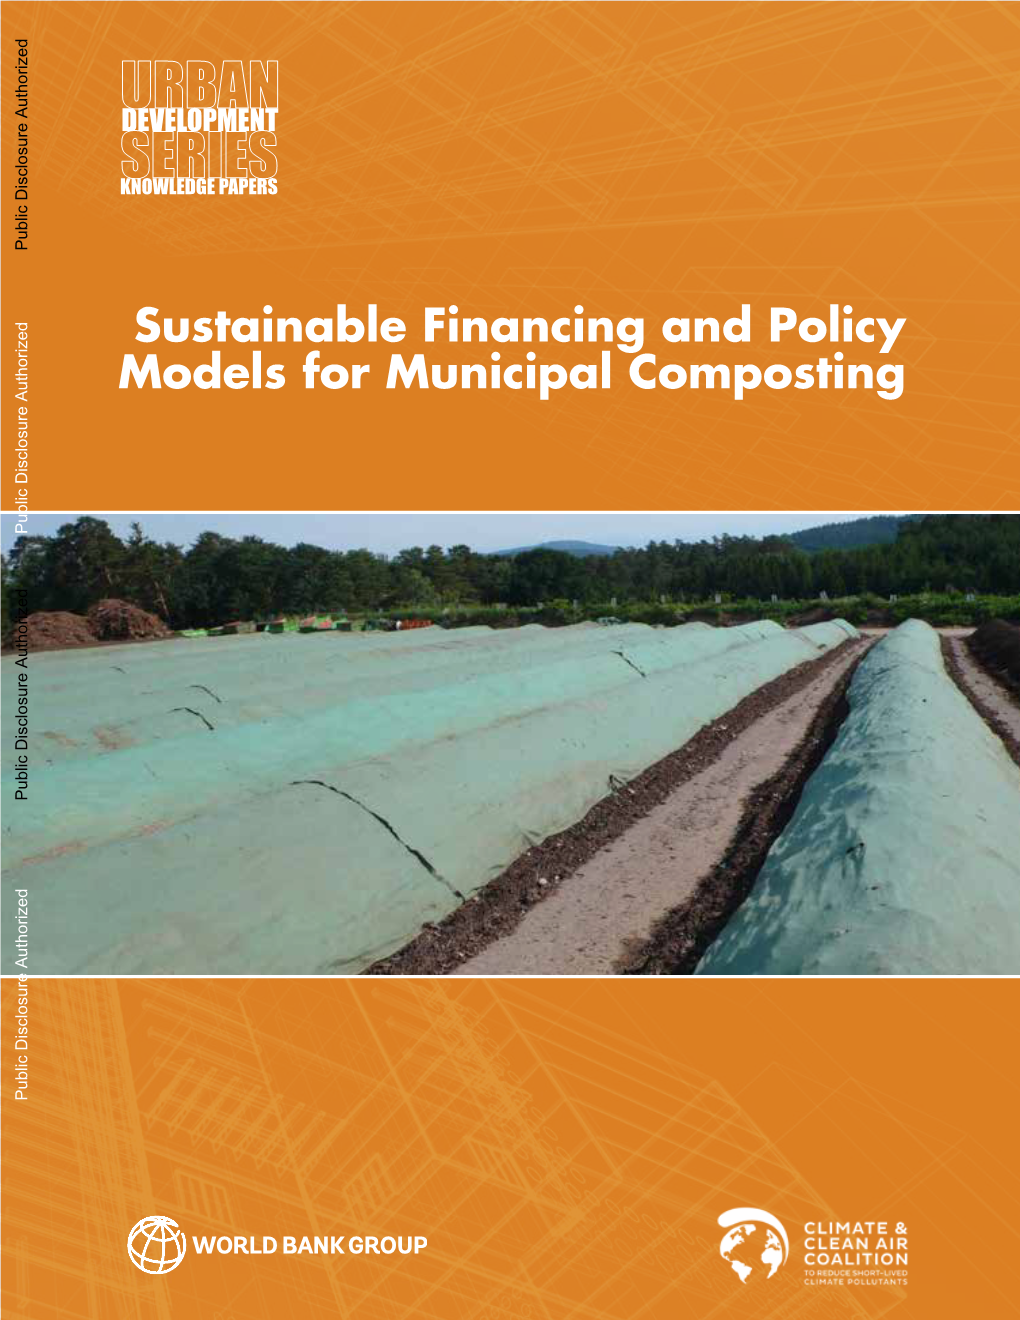 Sustainable Financing and Policy Models for Municipal Composting